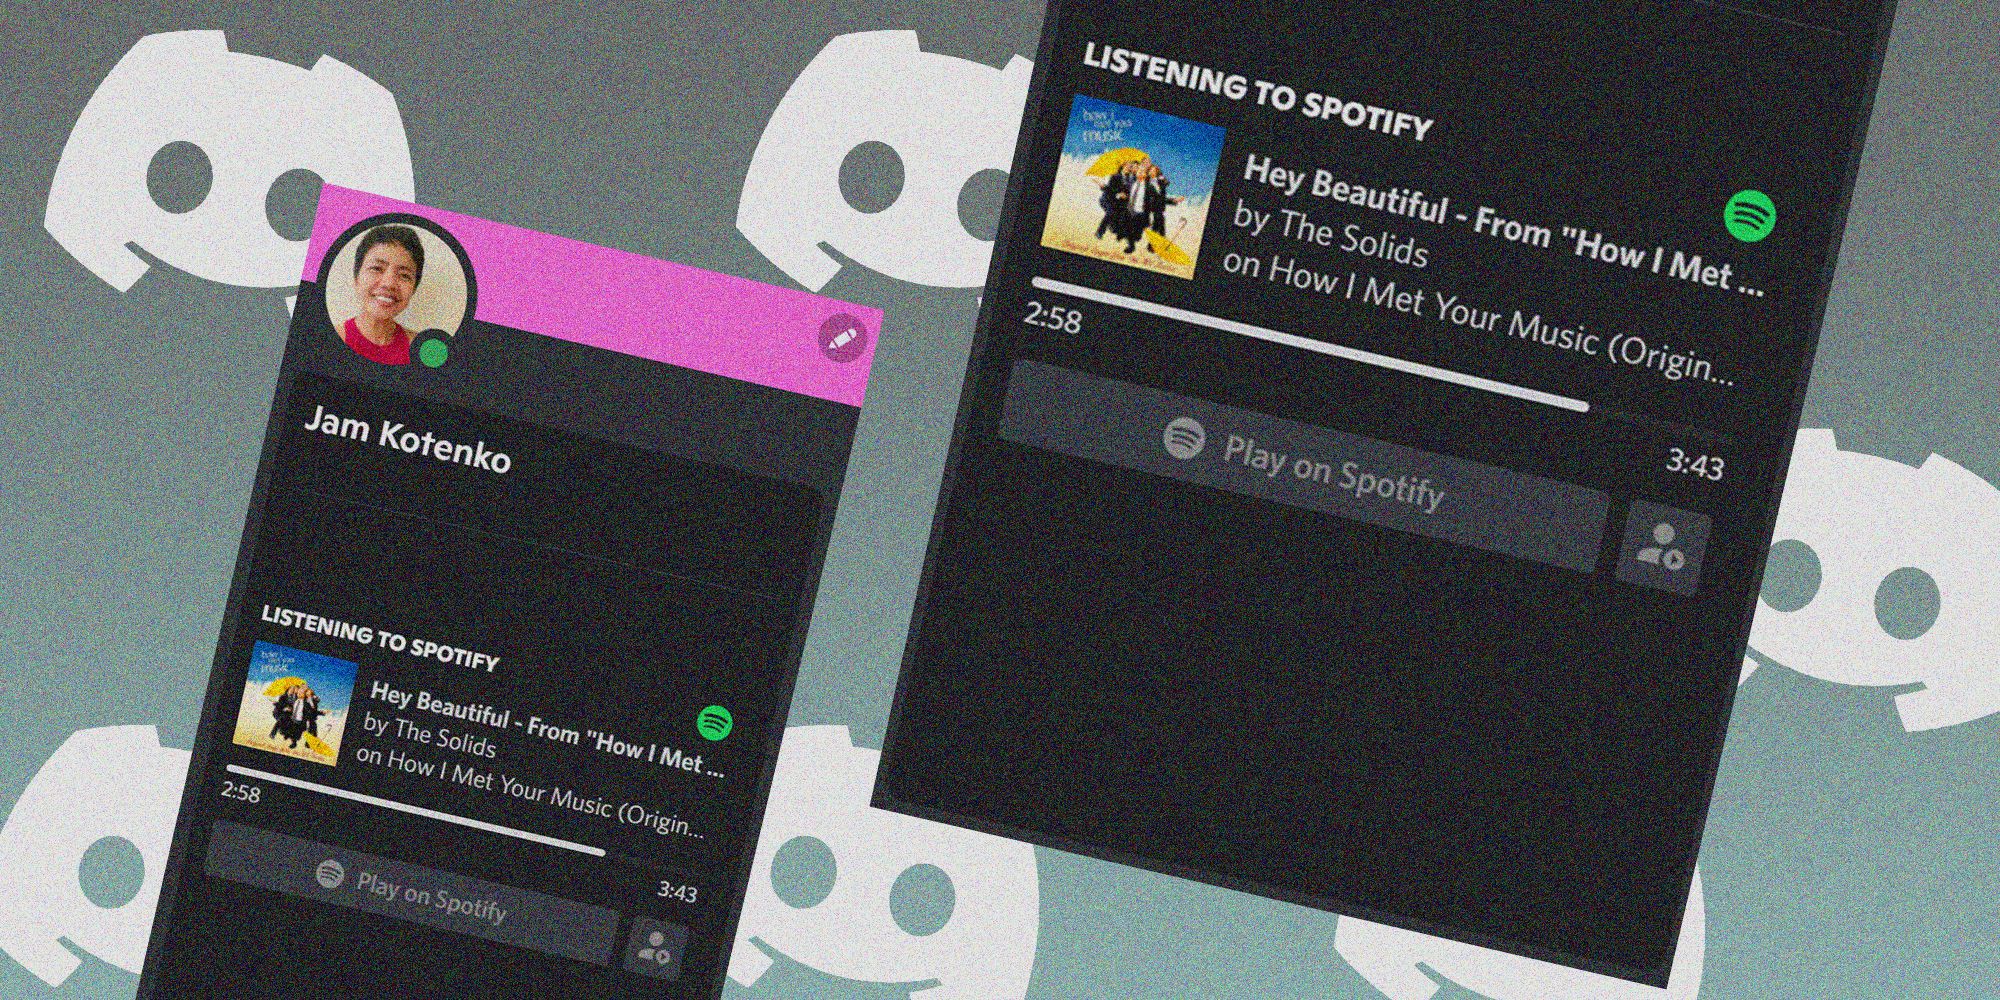 Want Spotify Premium? Here's what you need to know - GetConnected